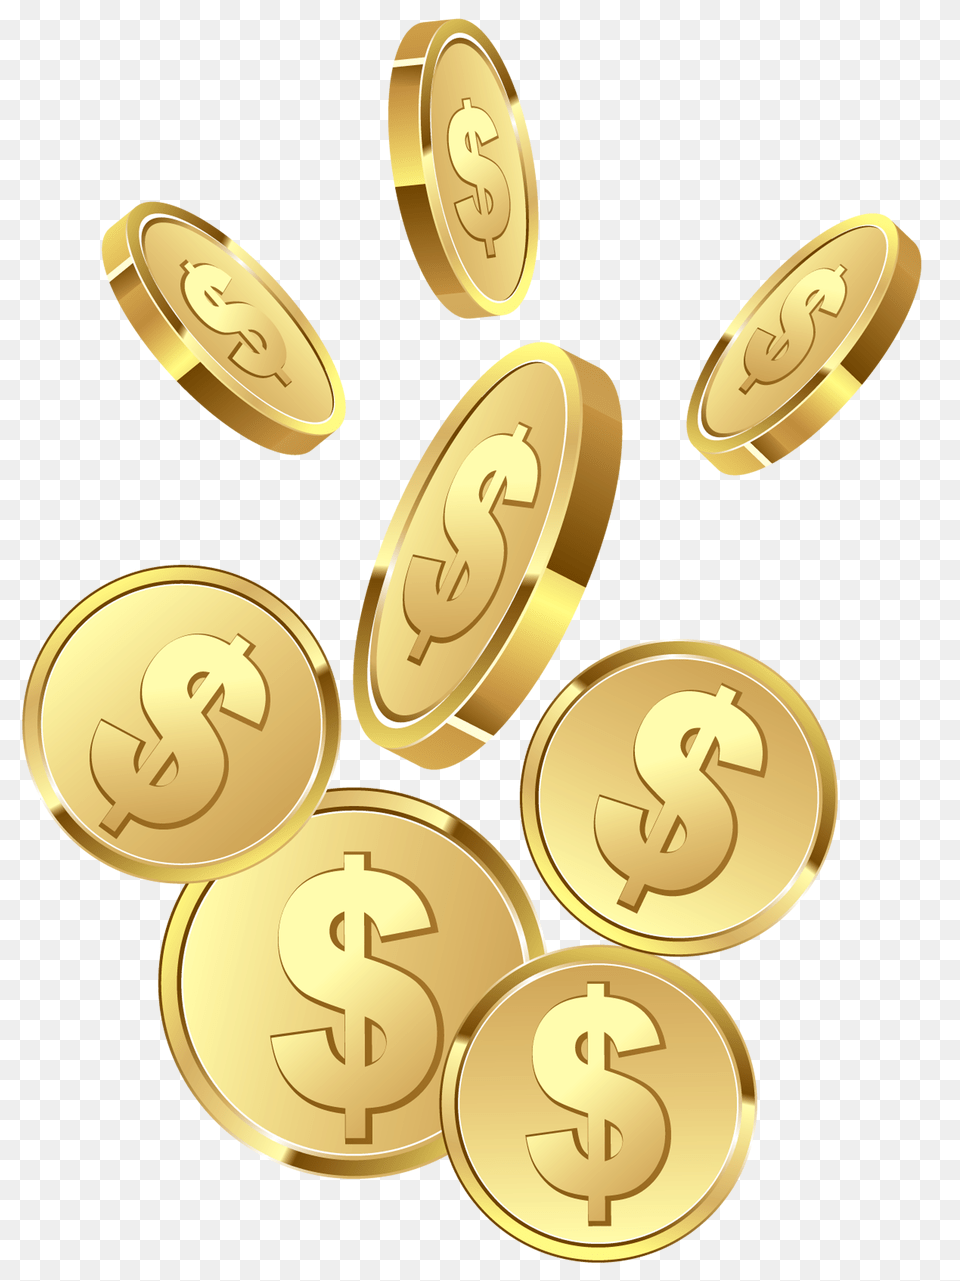 Gold Coins Purepng Cc0 Background Coins Clipart, Treasure, Dynamite, Weapon, Text Free Transparent Png